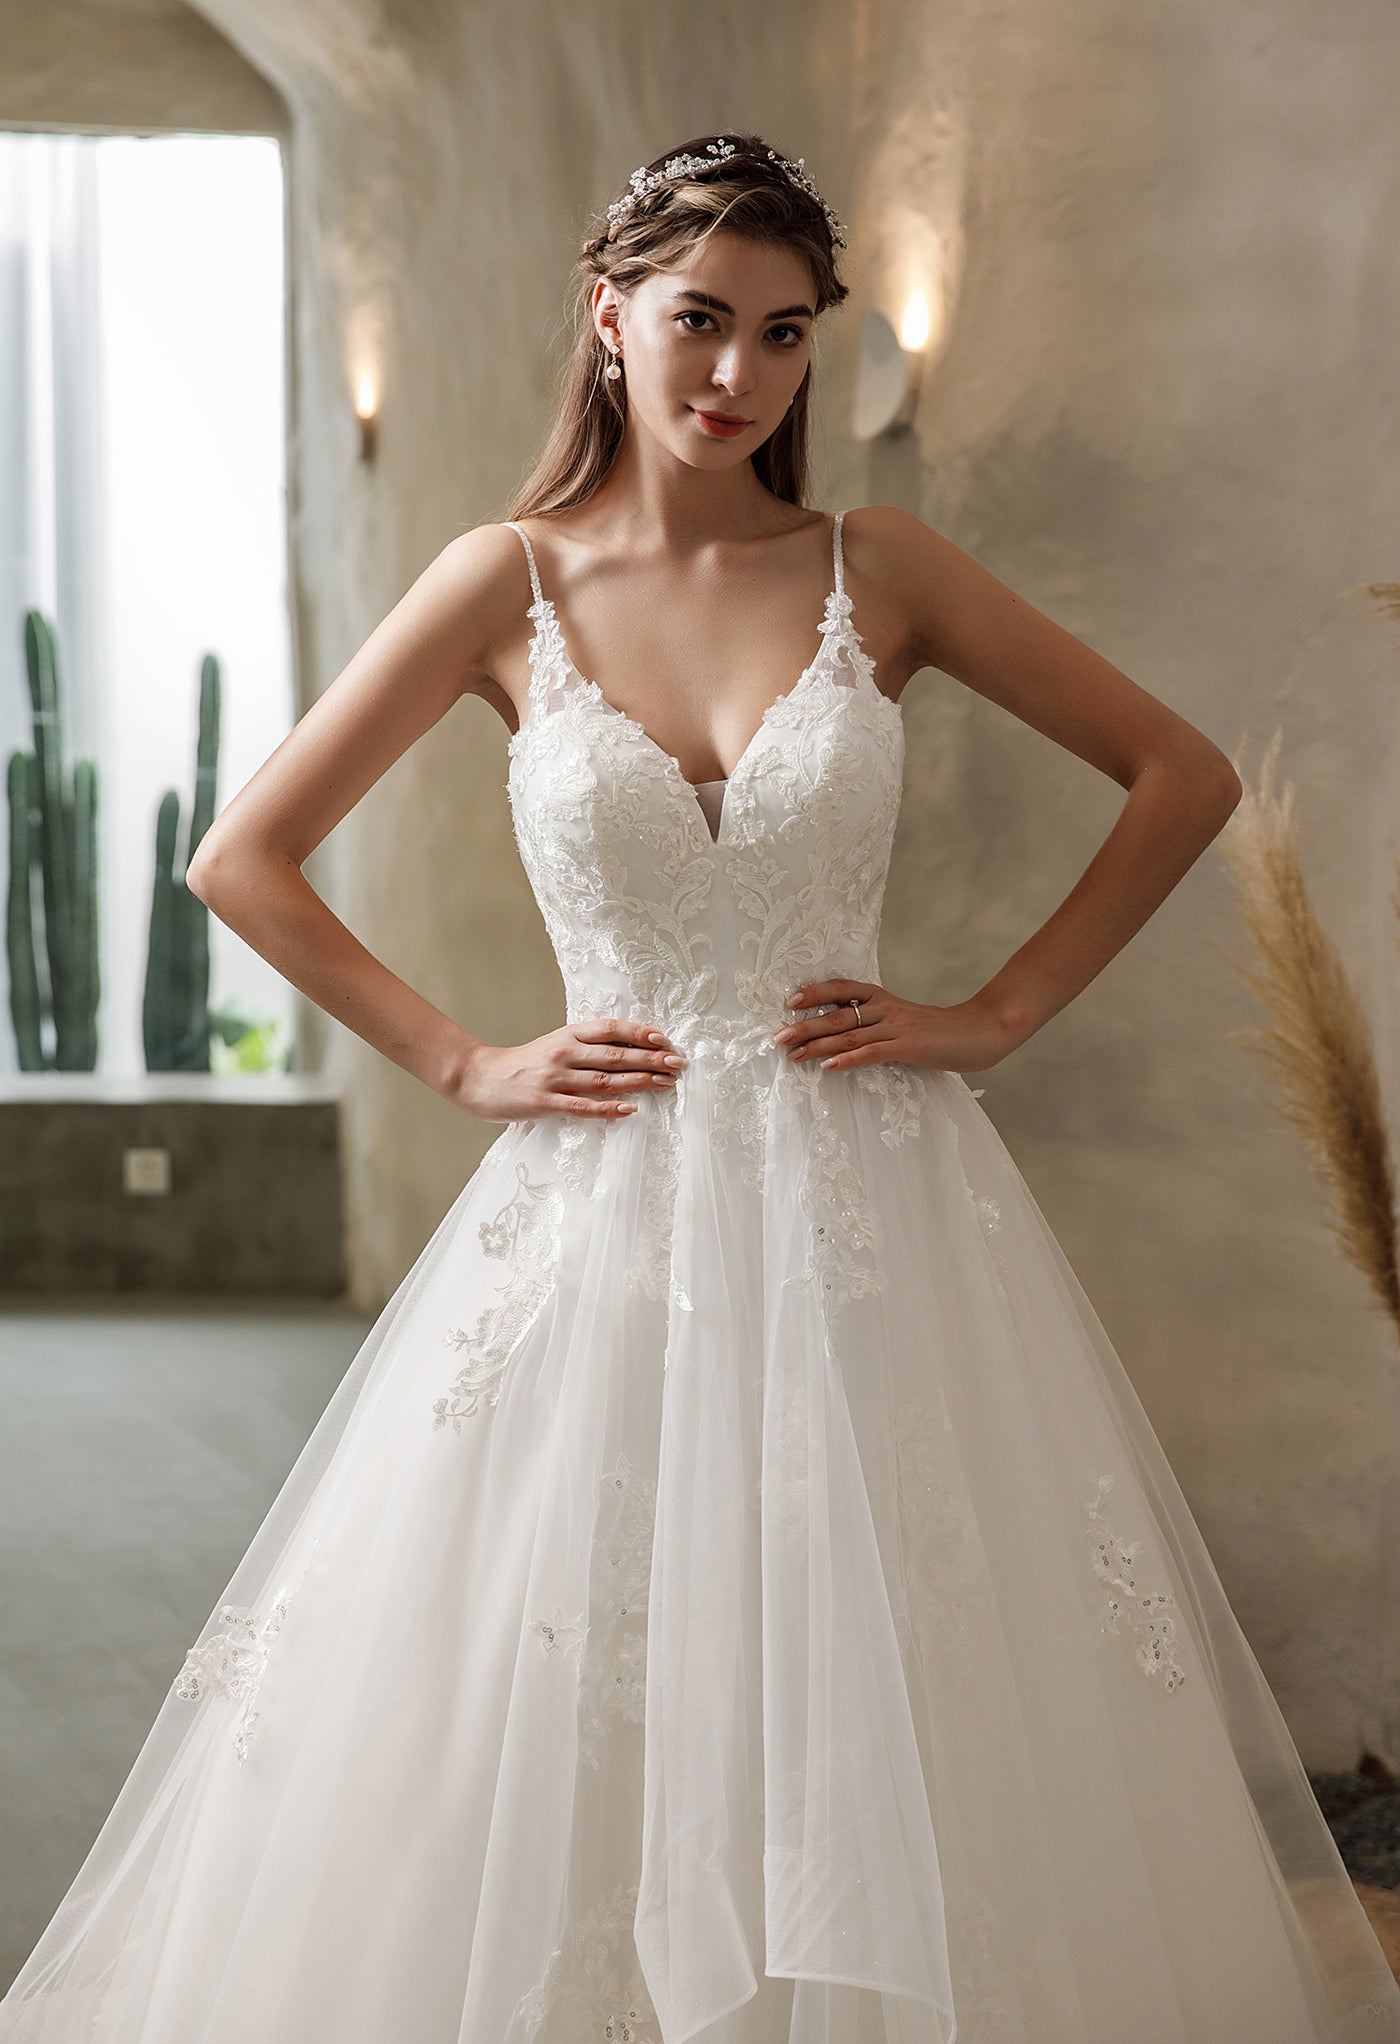 A bride in a white wedding dress is posing in a Bergamot Bridal's Illusion Back Tiered Tulle Skirt Ballgown Bridal Gown - Off The Rack at the bridal shop.